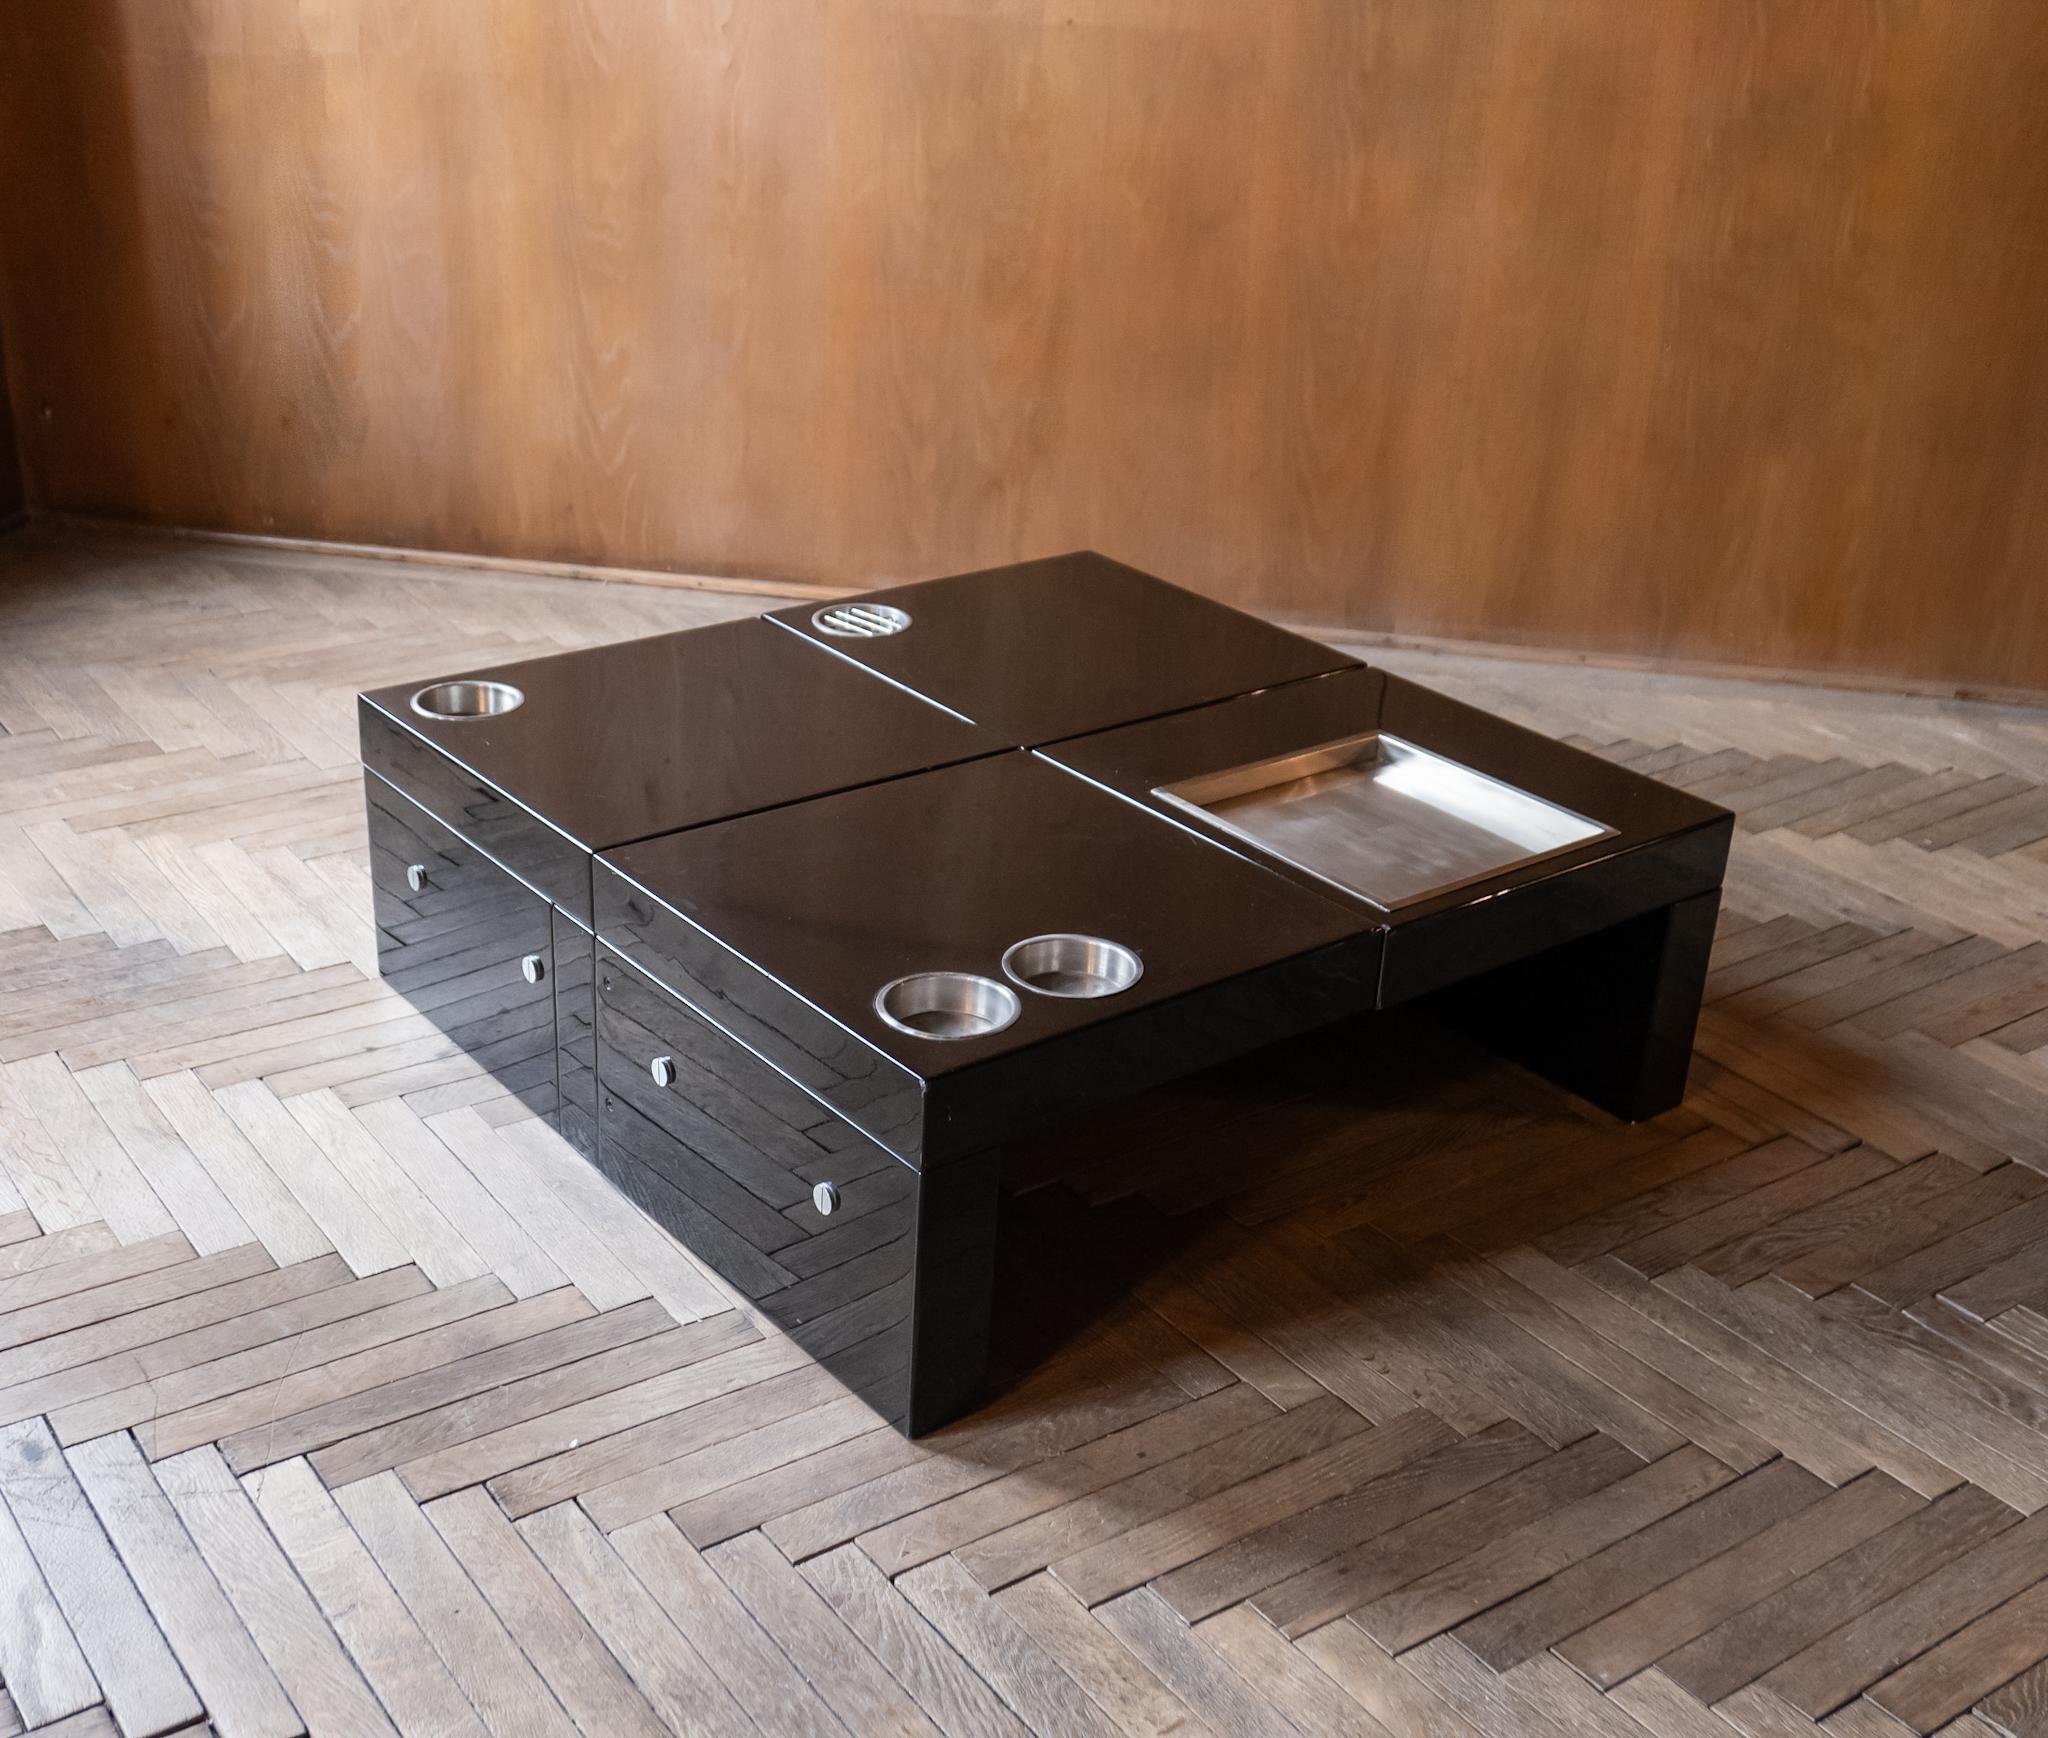 Mid-Century Modern BlackLaquered Coffee Table By Cesare Augusto Nava, Italy 1970s.

Very stylish black laquered coffee table designed by Cesare Augusto Nava in the 1970s. This coffee table made of lacquered wood is a statement piece from the space